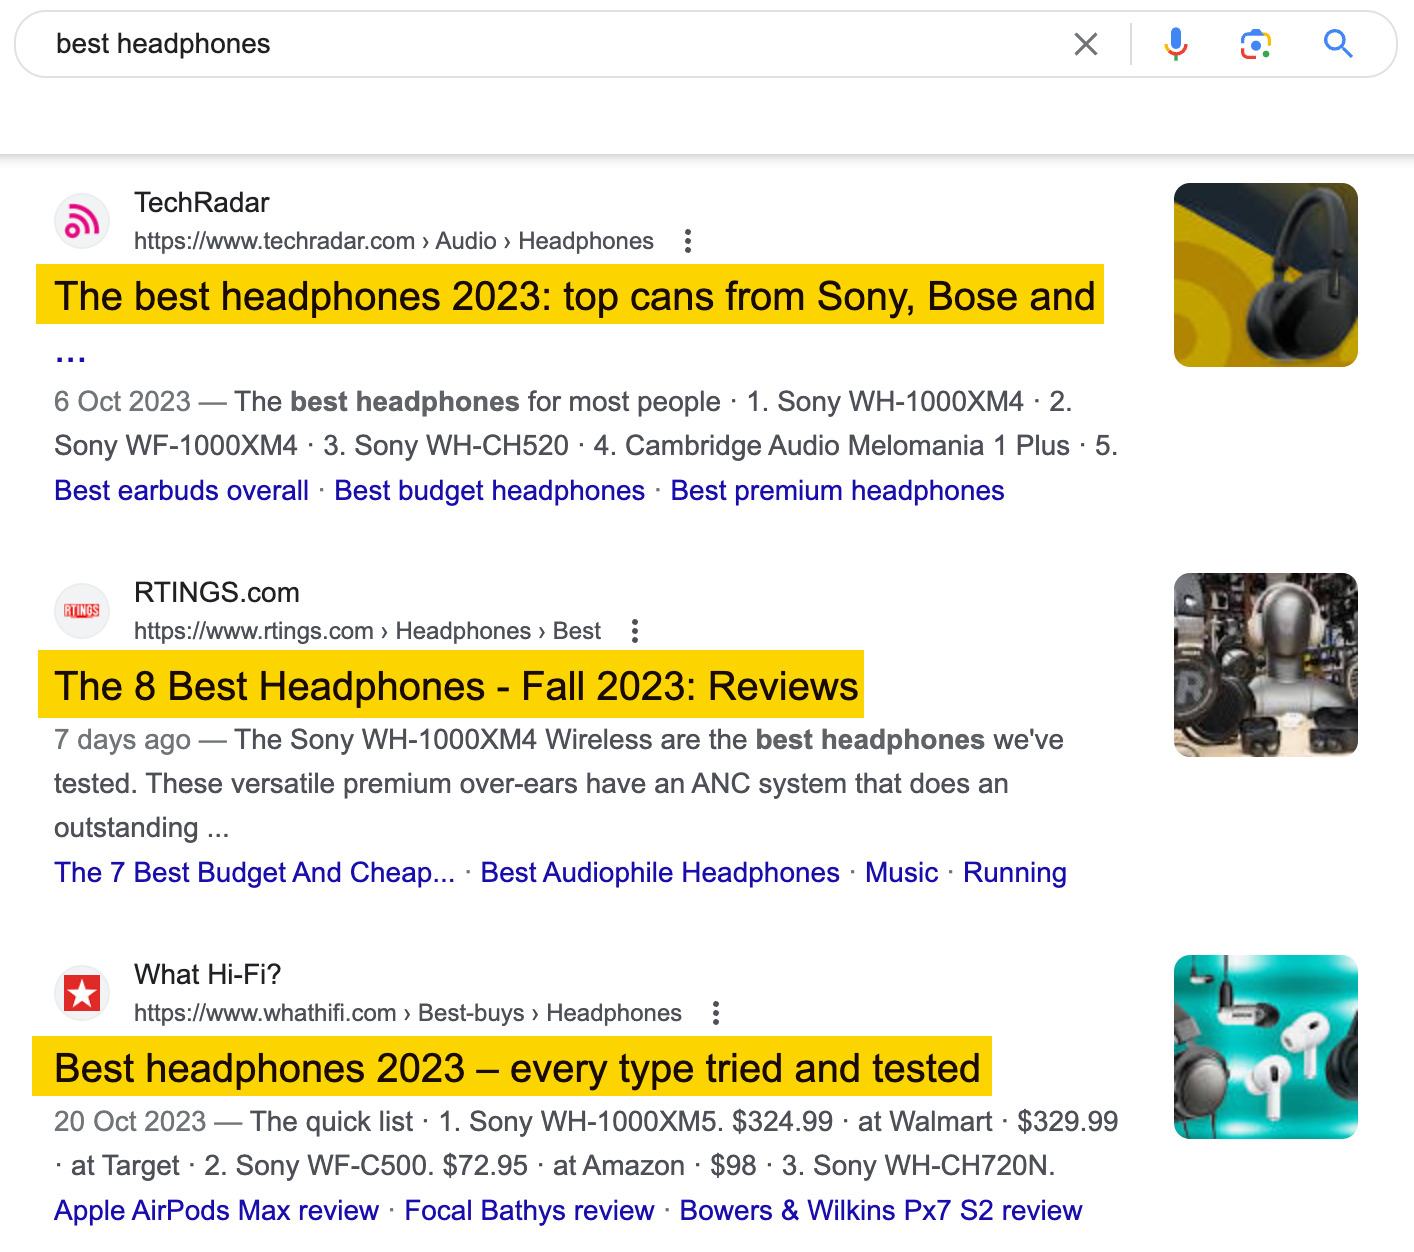 Search results for the query, "best headphones"
